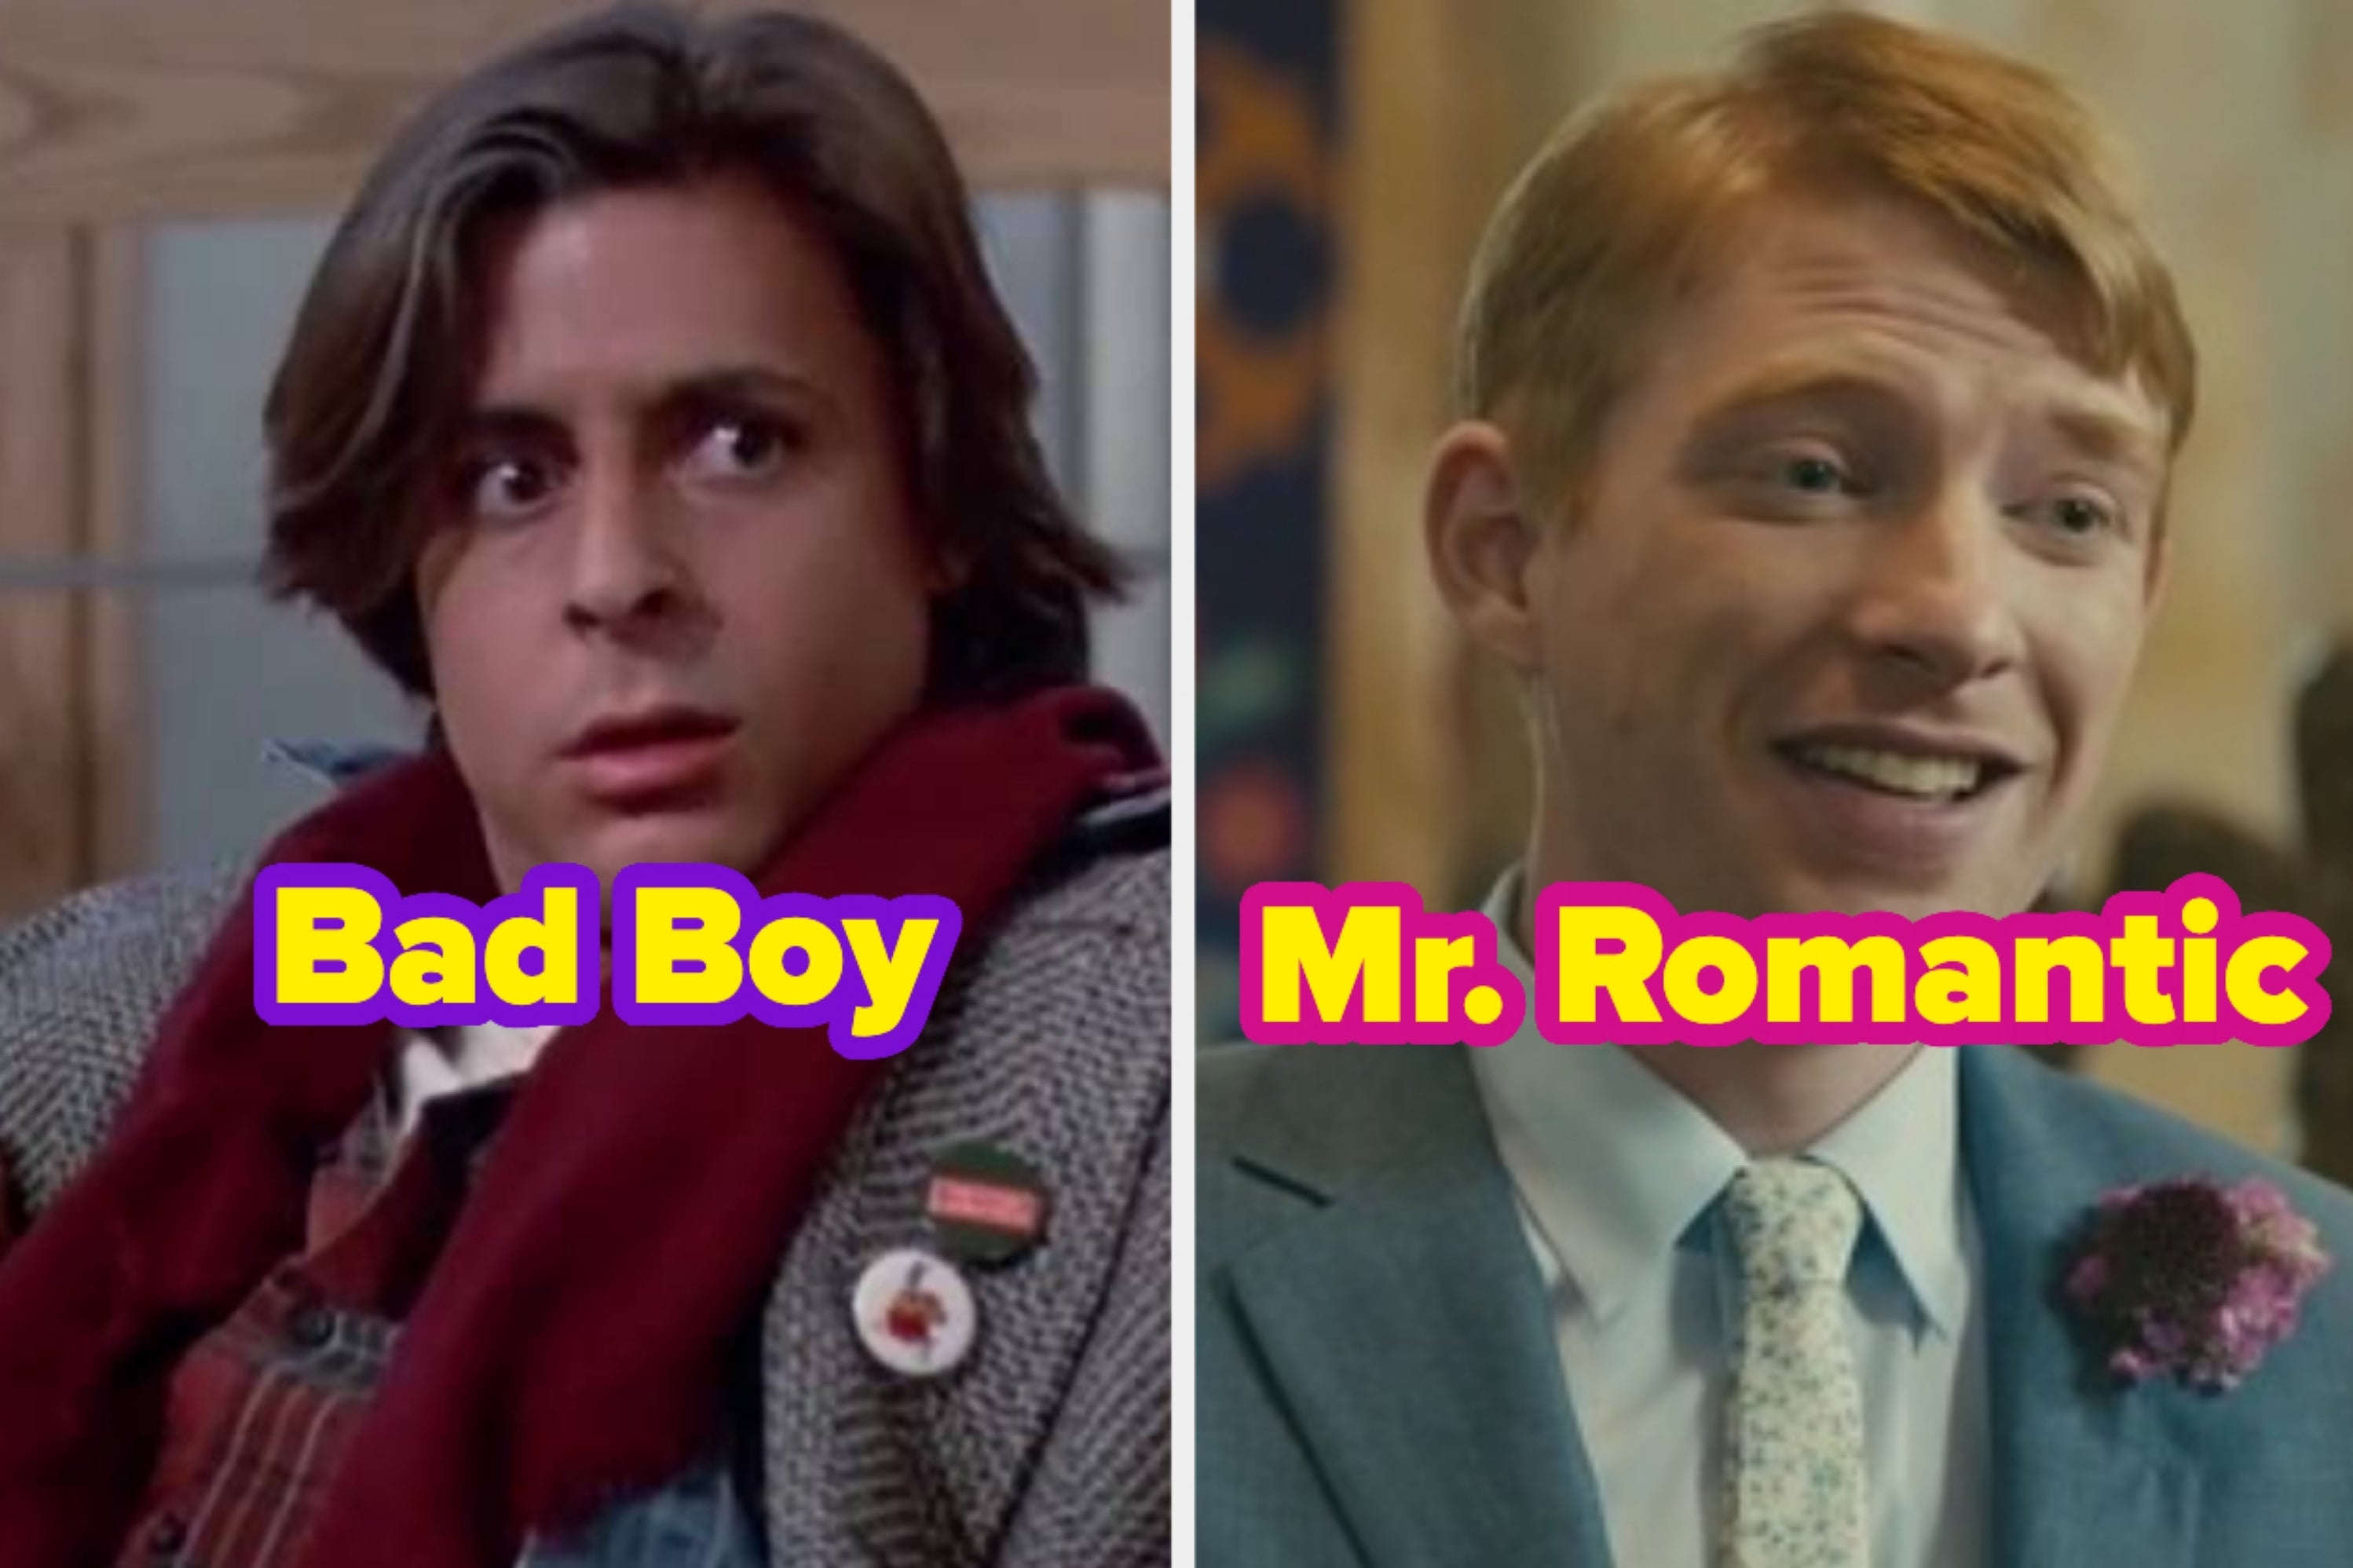 On the left, Judd Nelson as Bender in The Breakfast Club with Bad Boy typed under his chin, and on the right, Domhnall Gleeson as Tim in About Time with Mr. Romantic typed under his chin